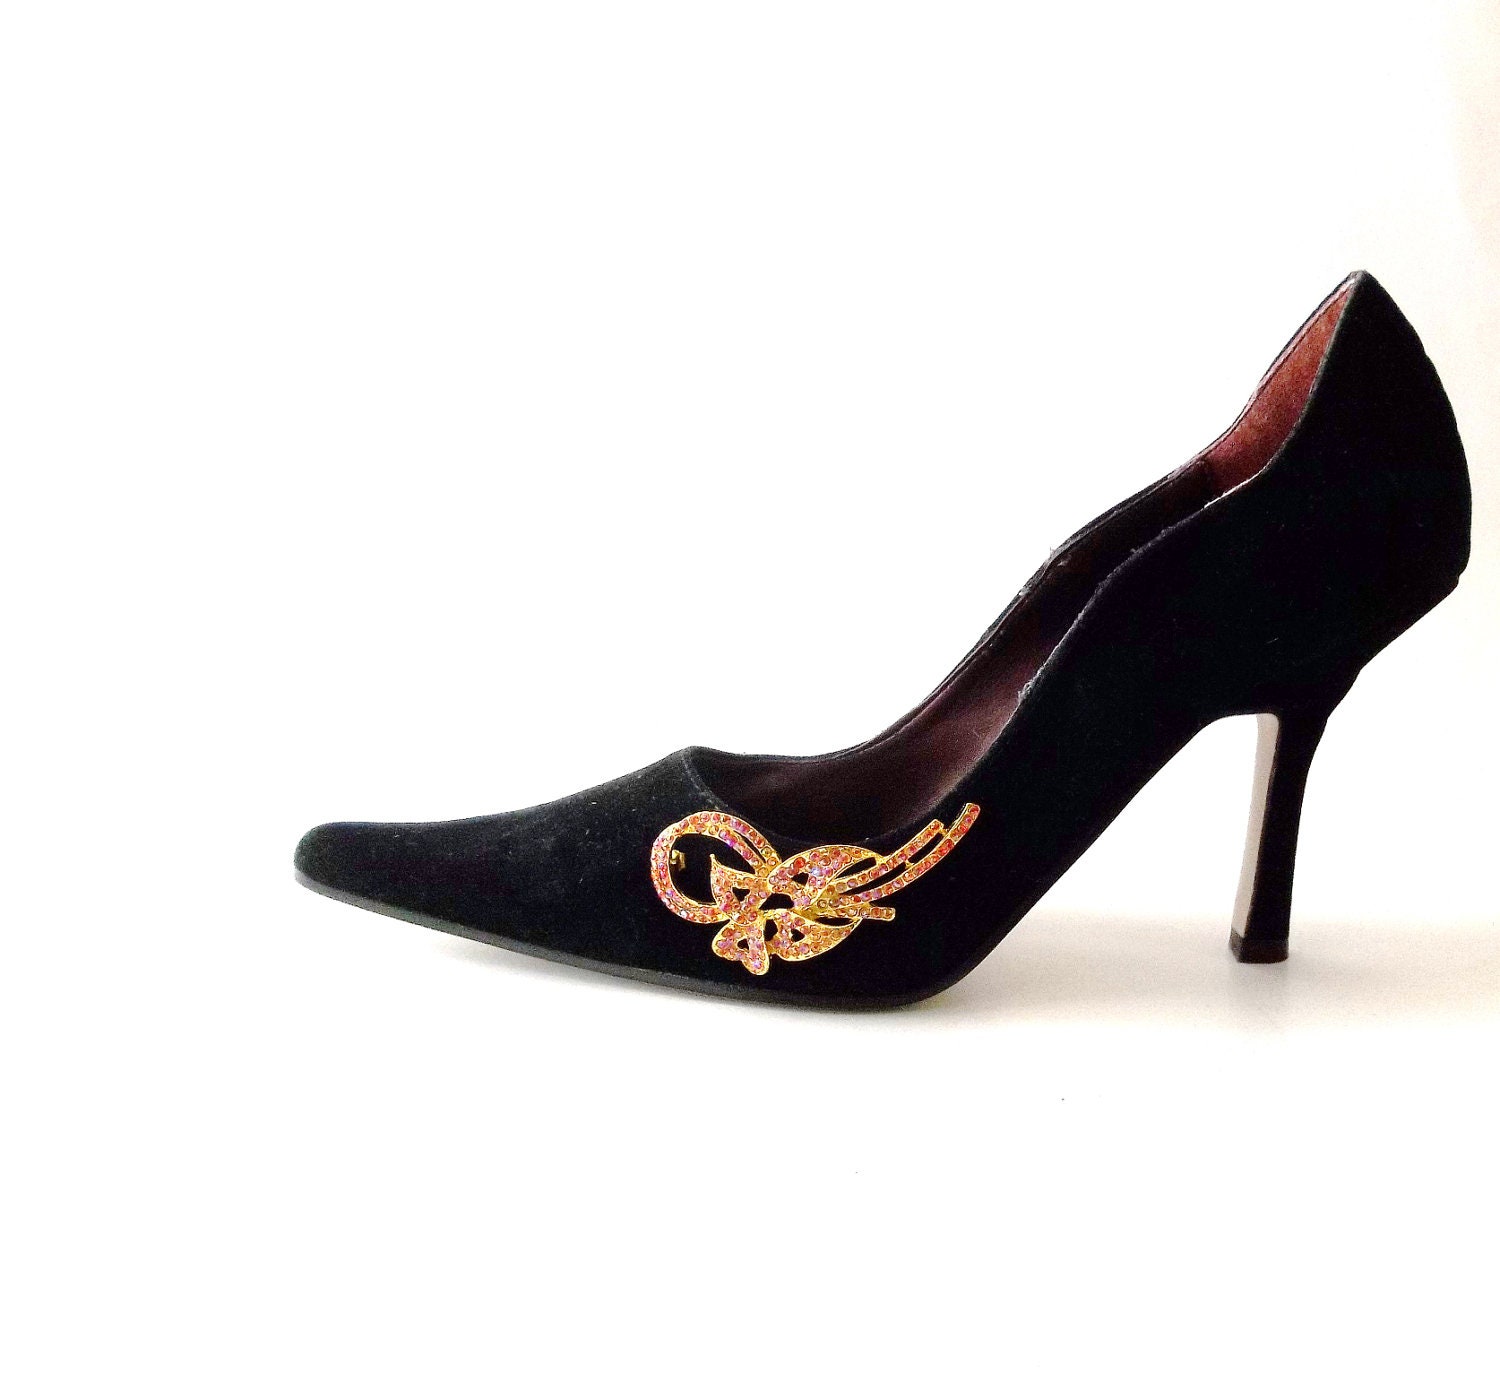 Vintage Black Suede High Heels Pumps. Shoe Clips.Honey Gold Bows. Holiday Sparkle. Size 6.5 - GLAMOURGIRLCHIC